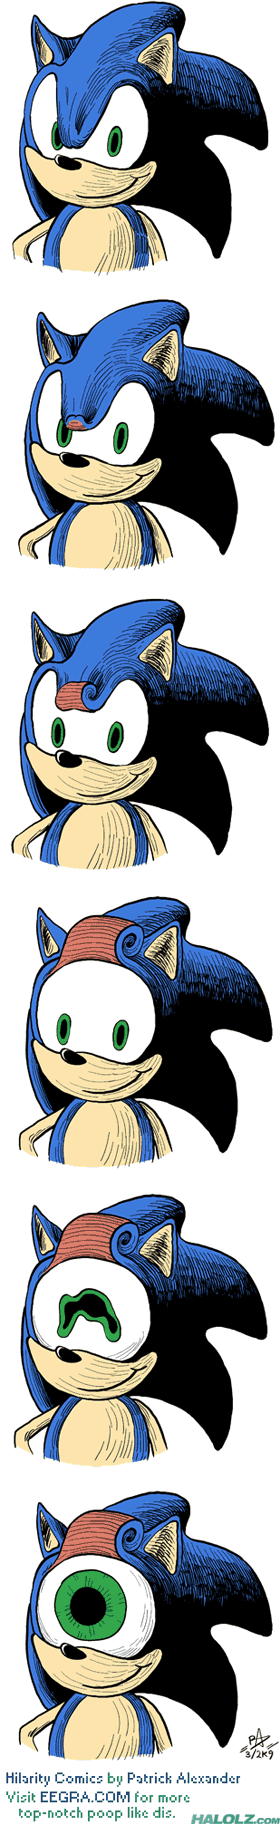 The Truth Behind Sonic's Eyes (Comic)